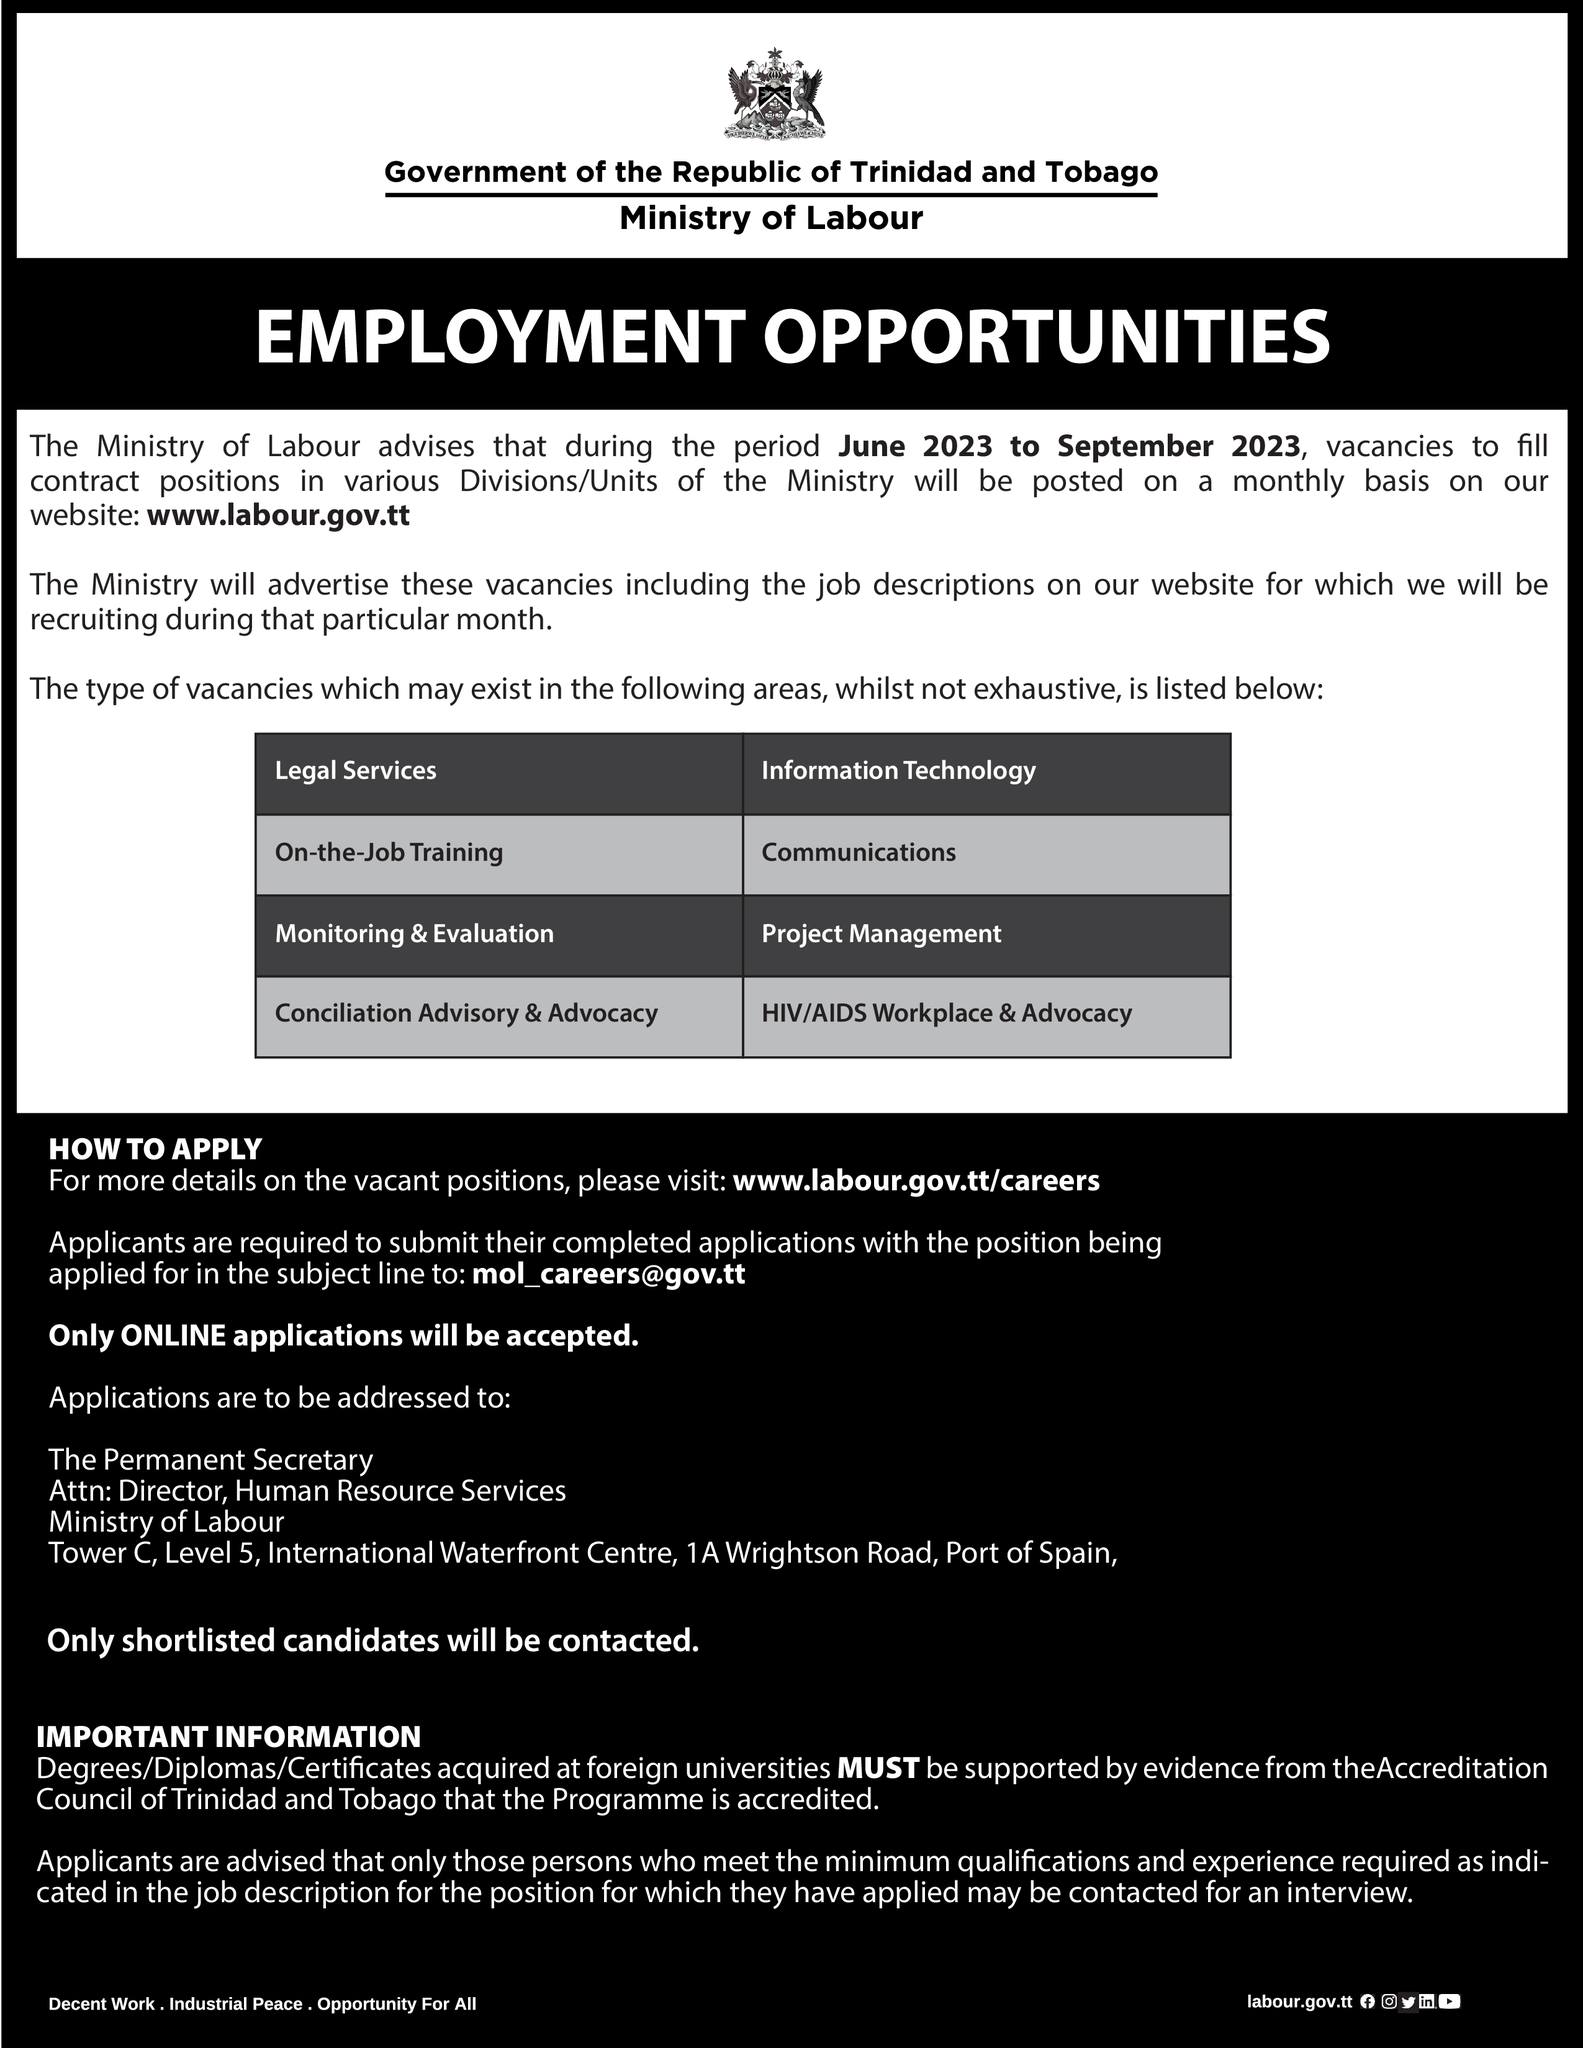 Ministry of Labour Vacancies